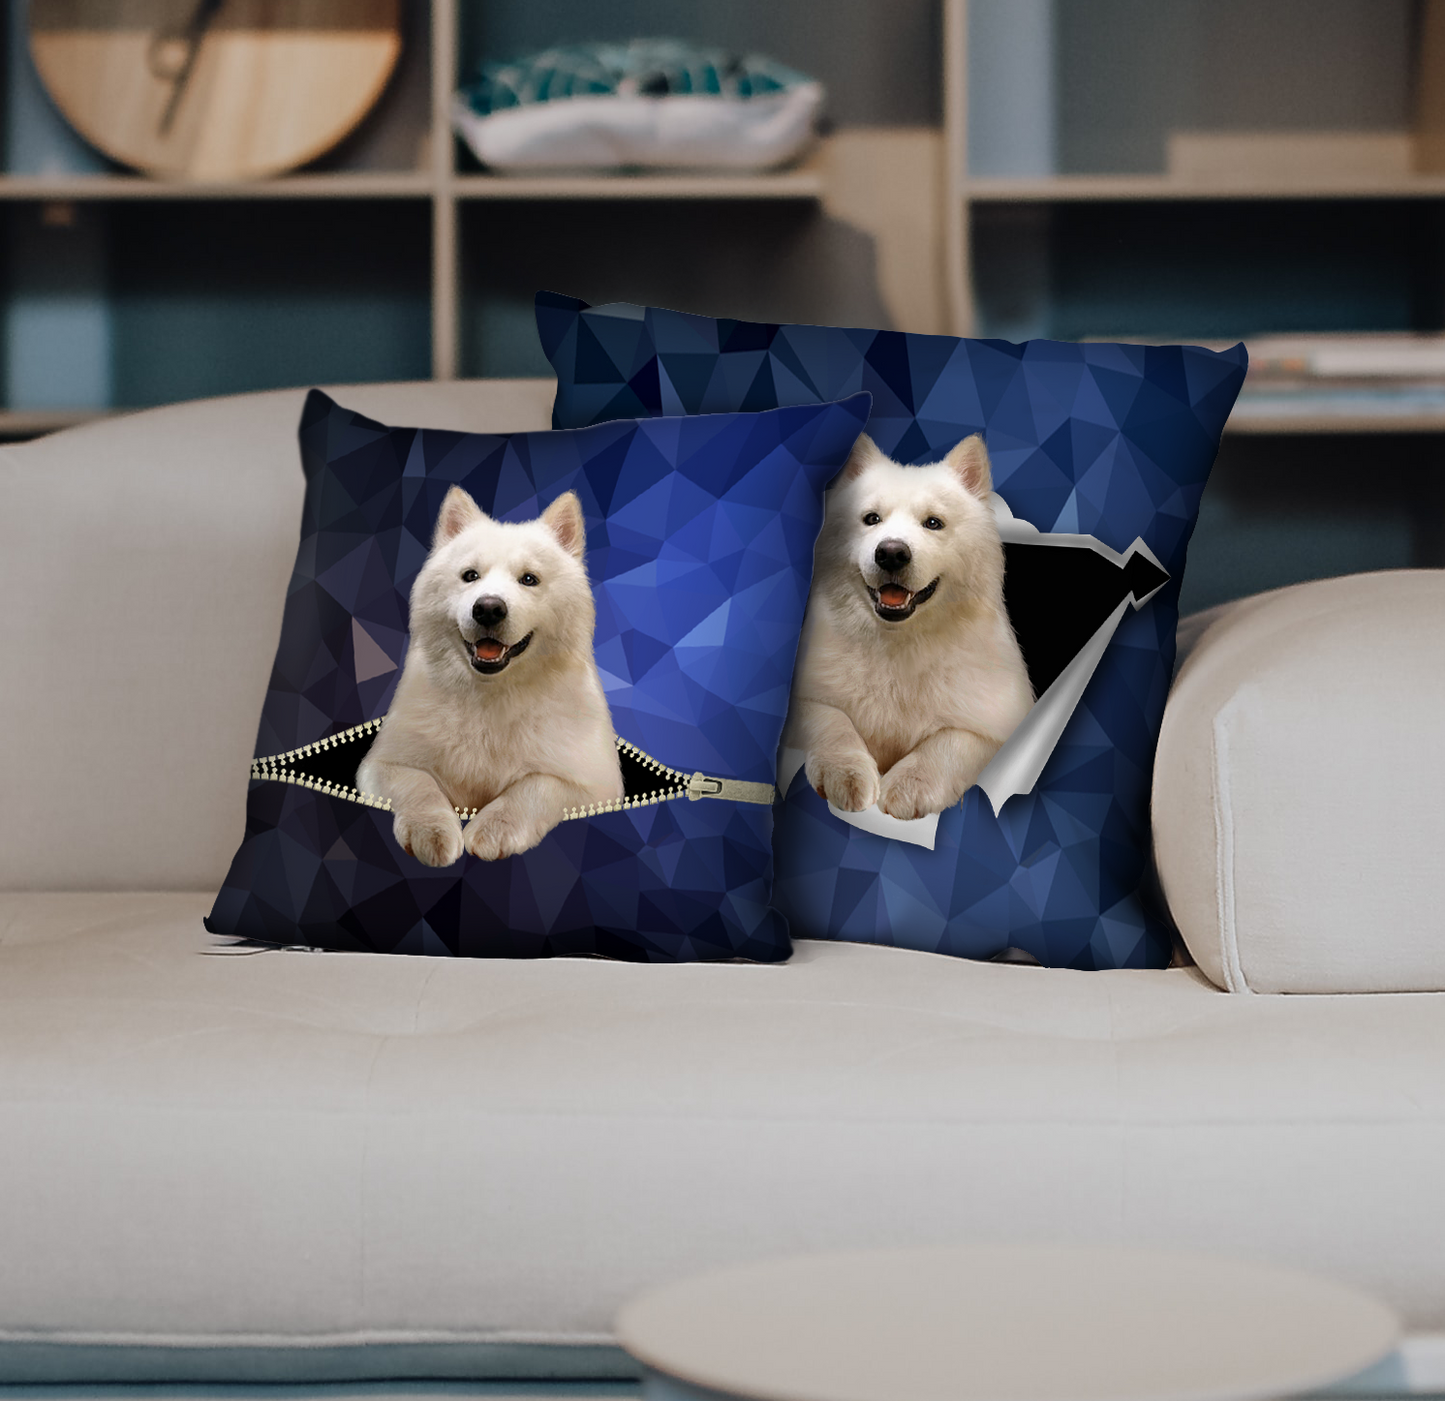 They Steal Your Couch - Samoyed Pillow Cases V2 (Set of 2)